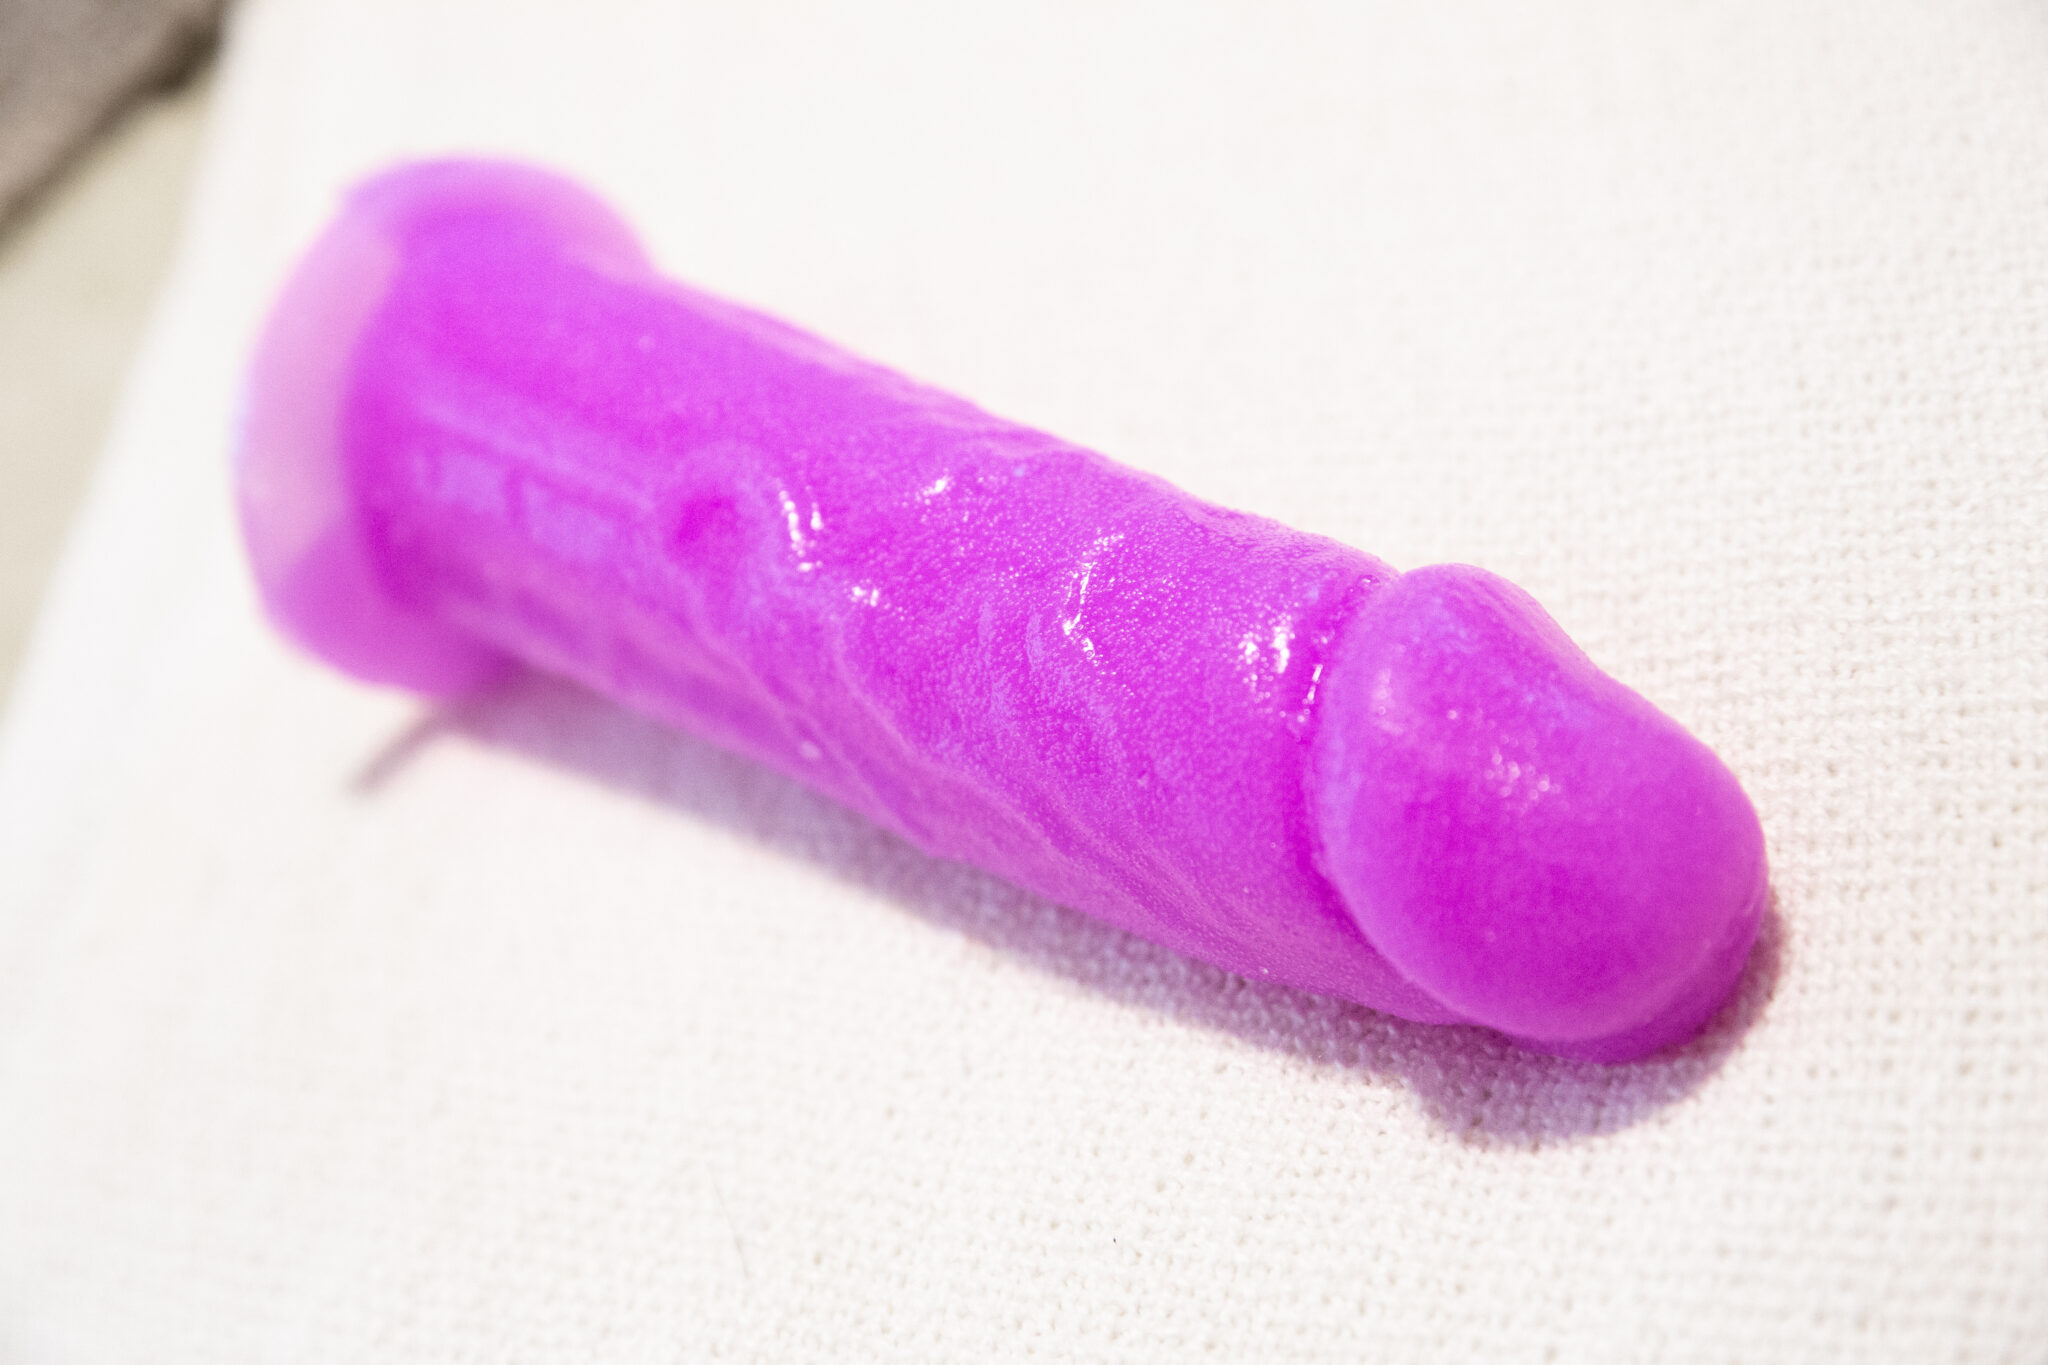 The final product of the neon purple DIY dildo.